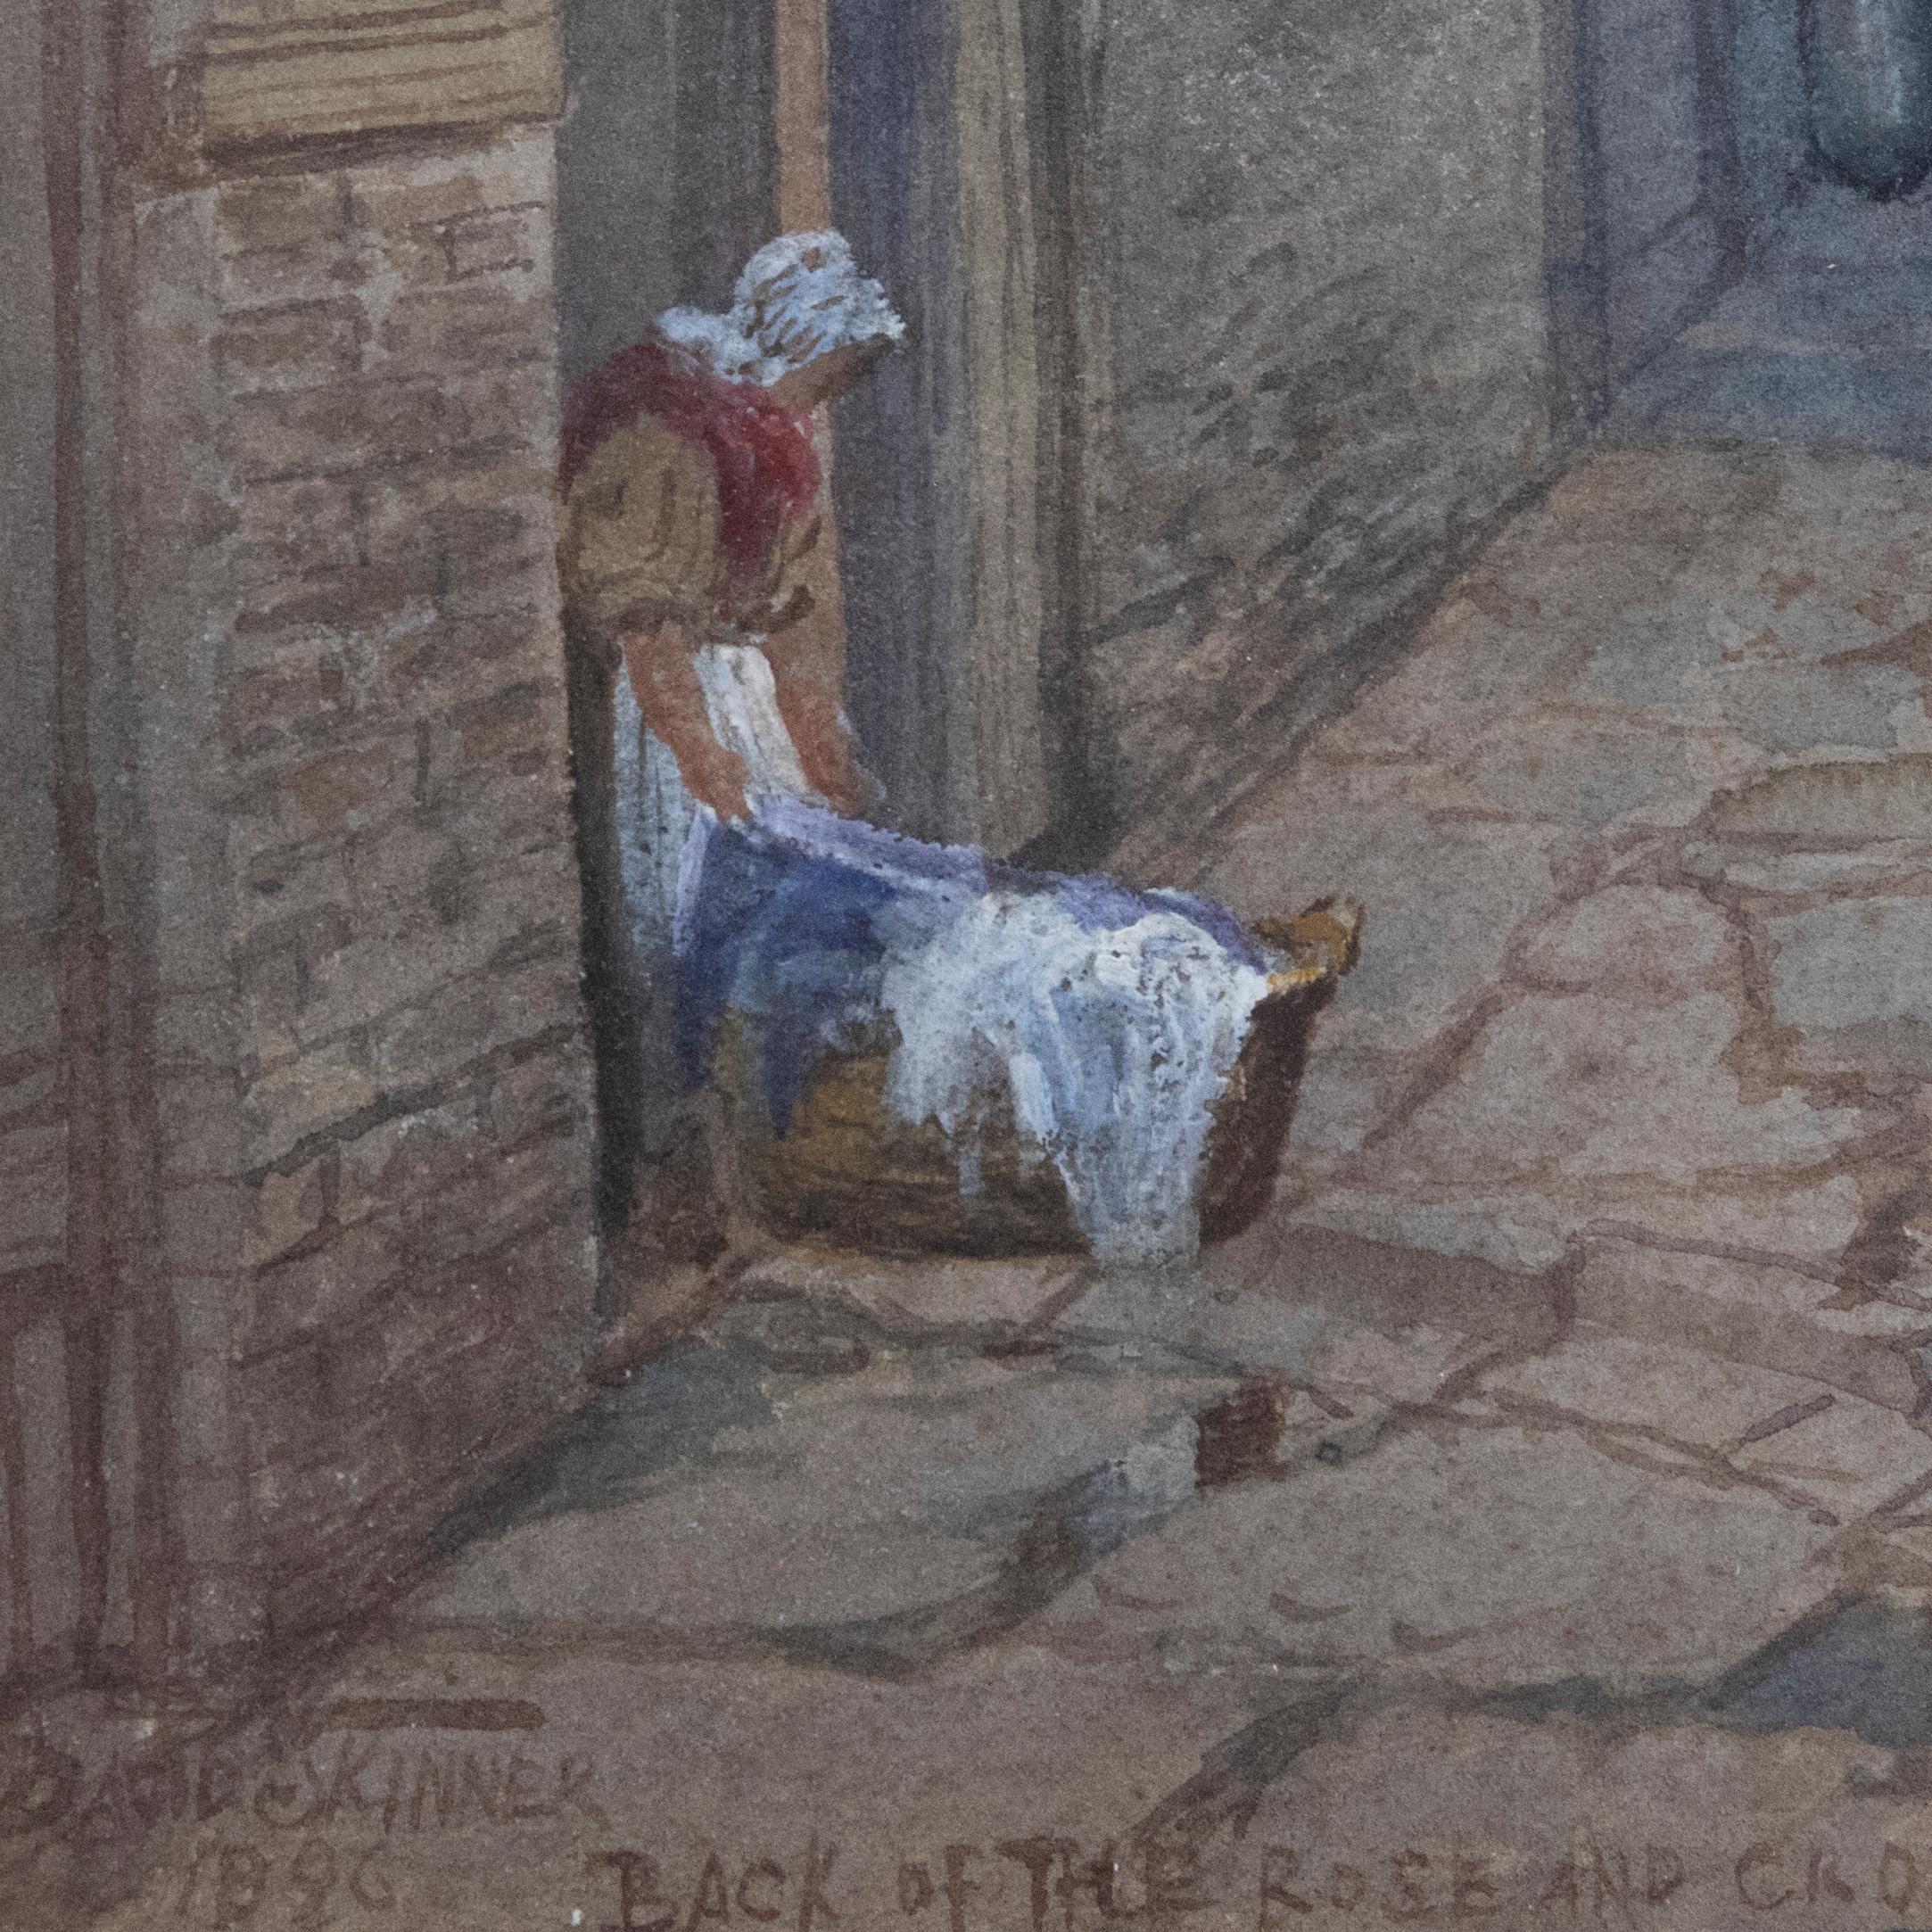 A wonderful late Victorian watercolour capturing the back alley of the Rose & Crown Pub in Plymouth. The watercolour has been well-presented in a gilt wood frame with a wash-line mount. Signed, dated and inscribed by the artist to the lower edge. On